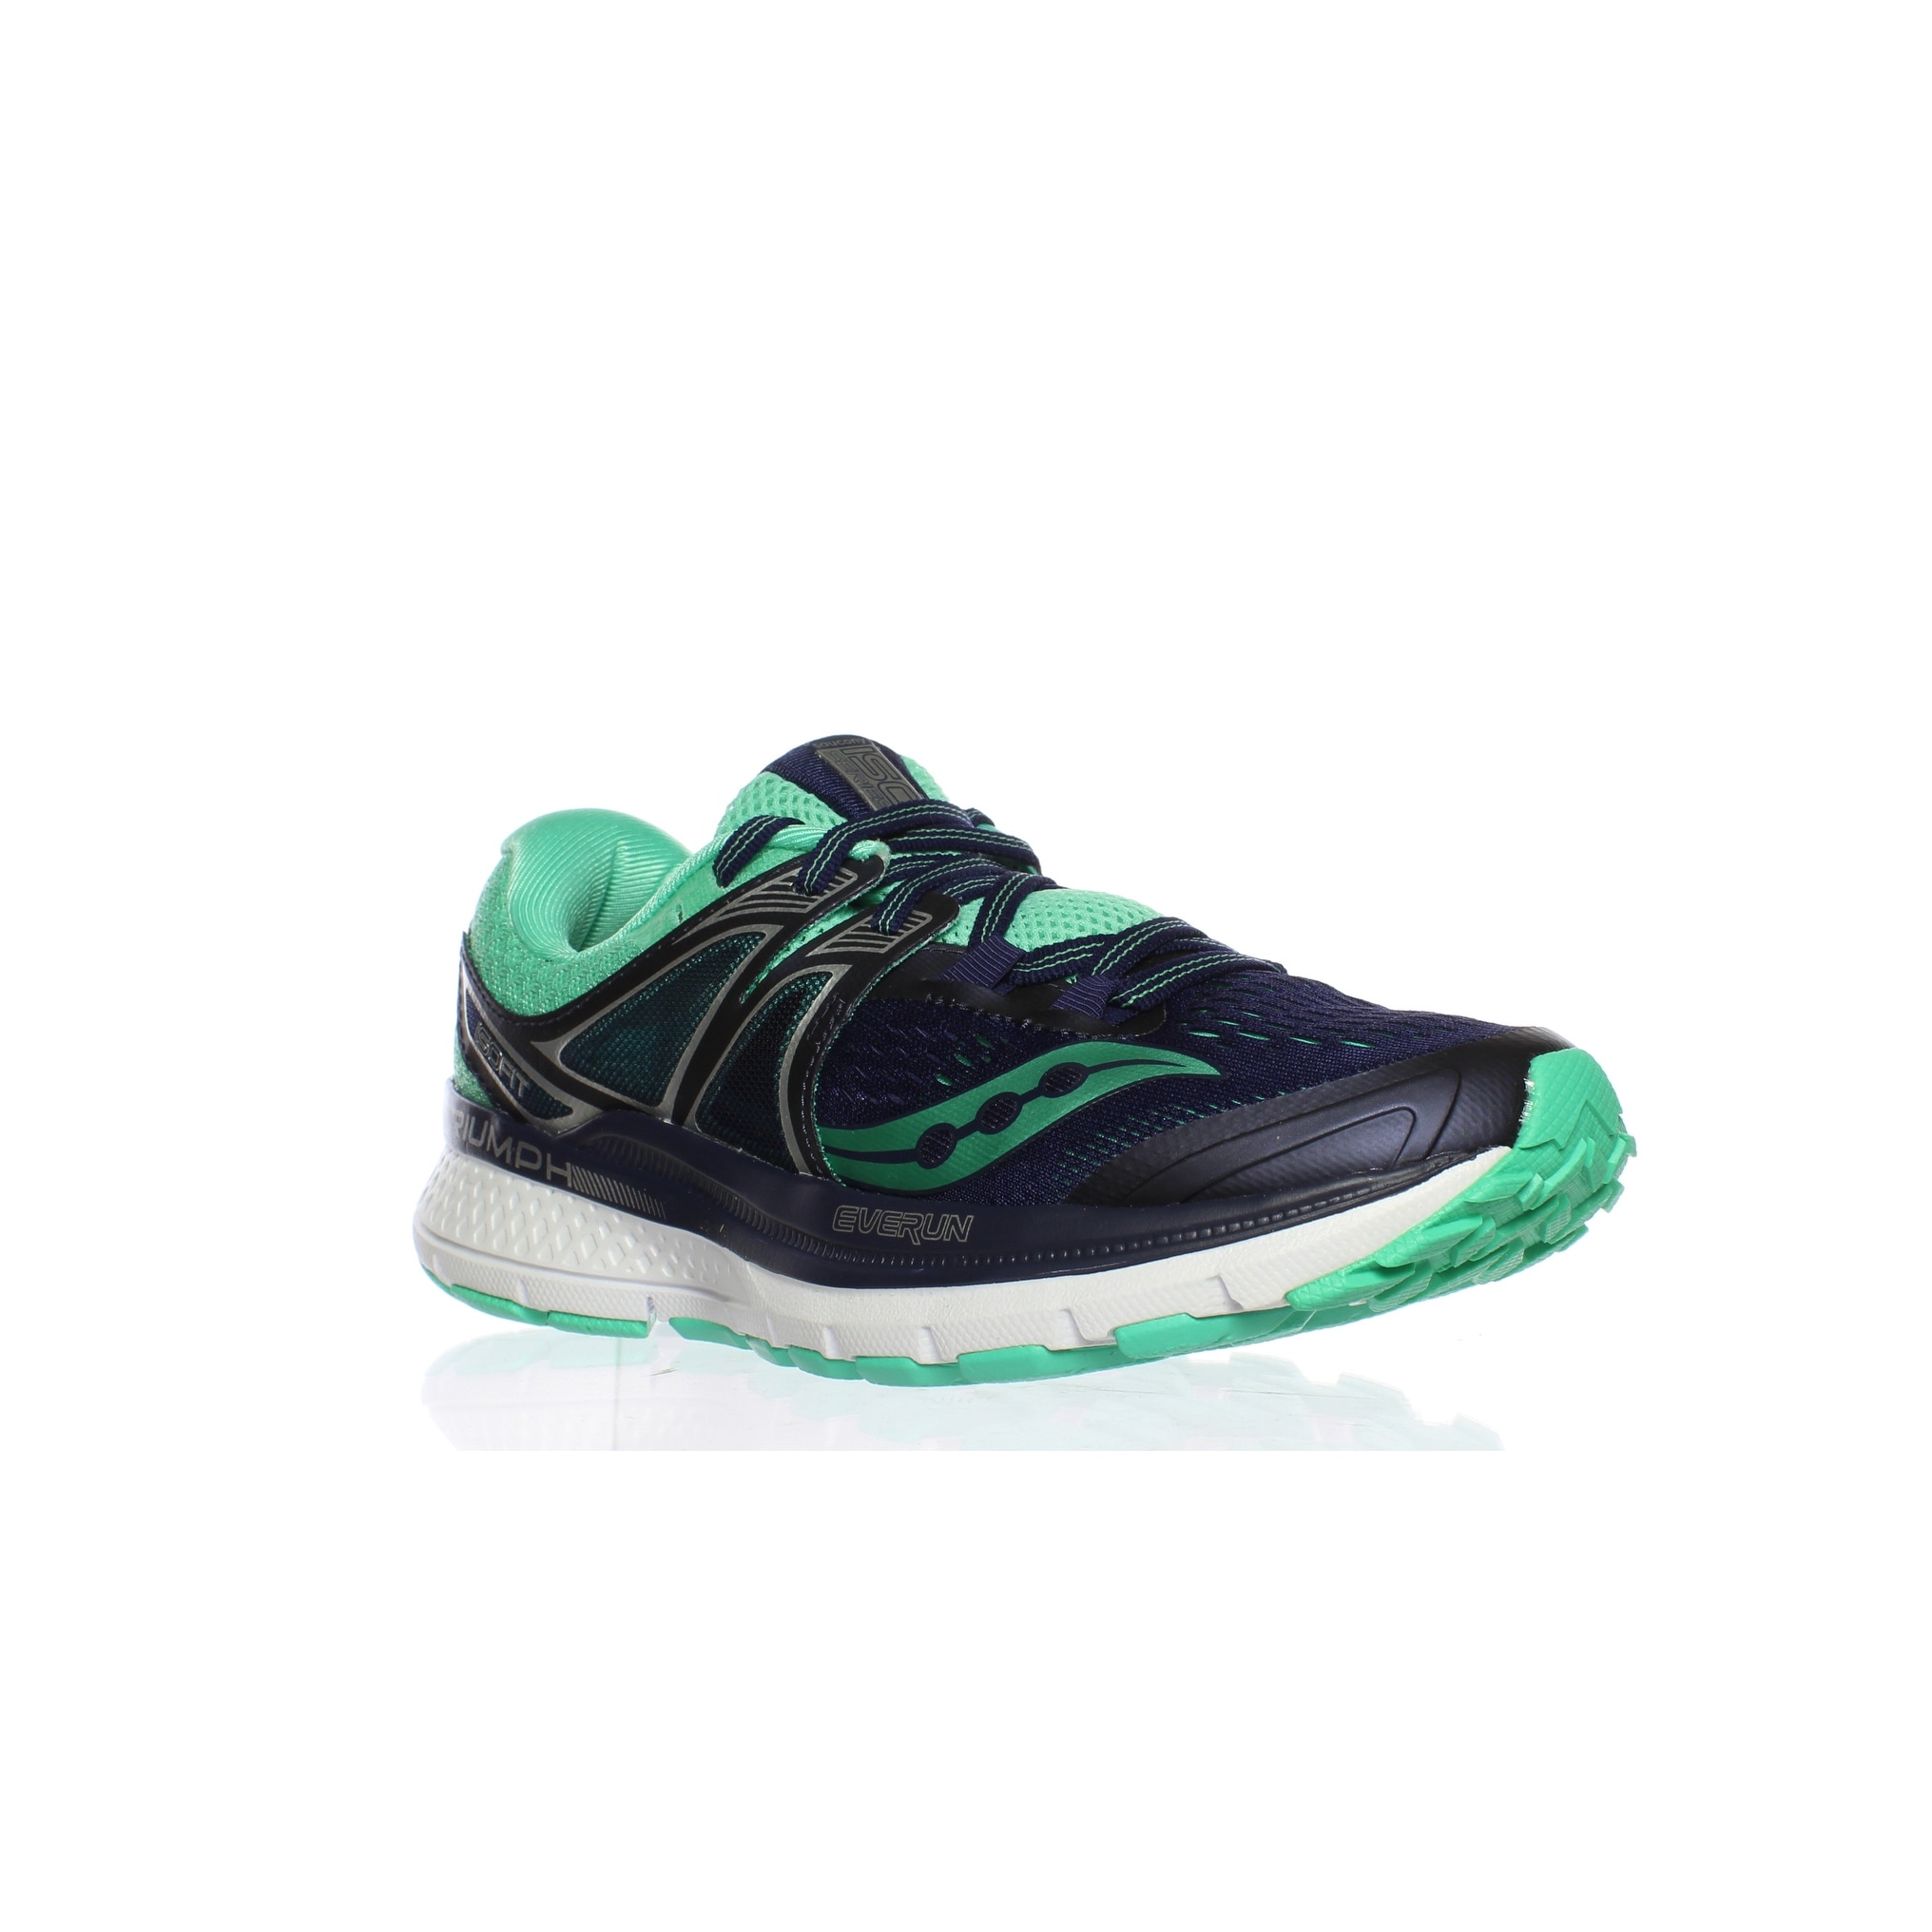 saucony womens running shoes size 5